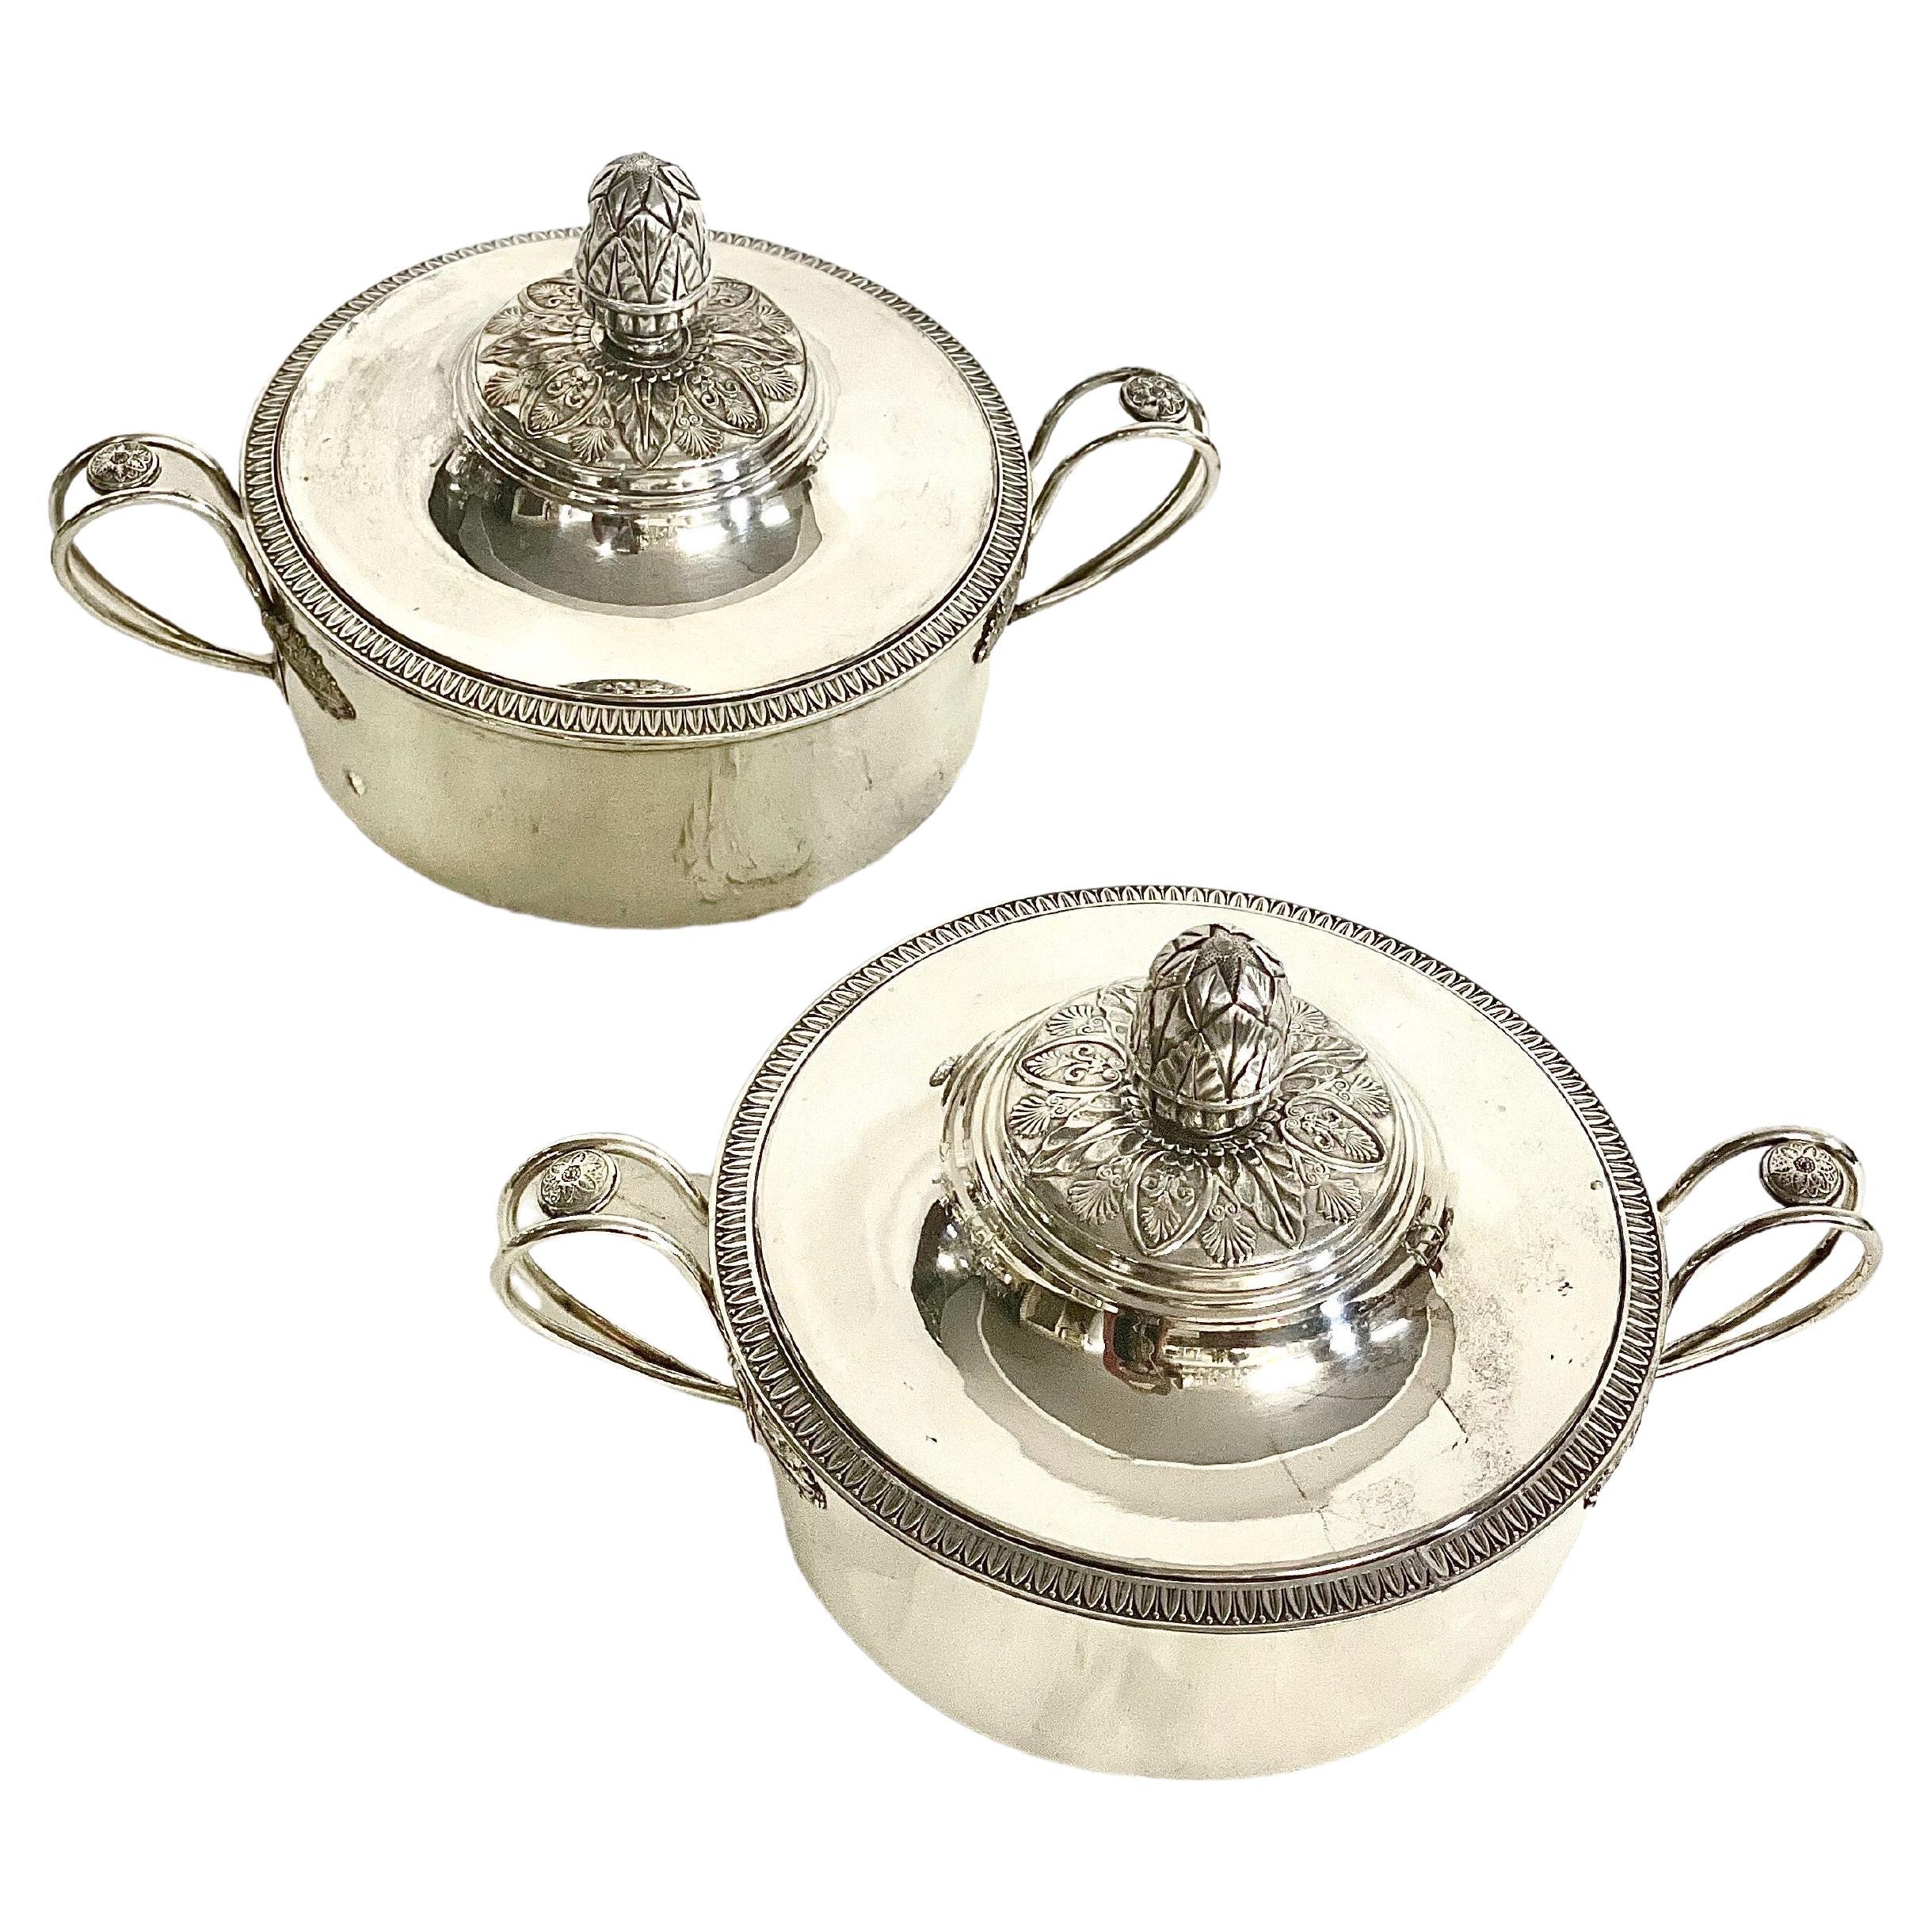 Pair of Silver-Plated Vegetable Tureens